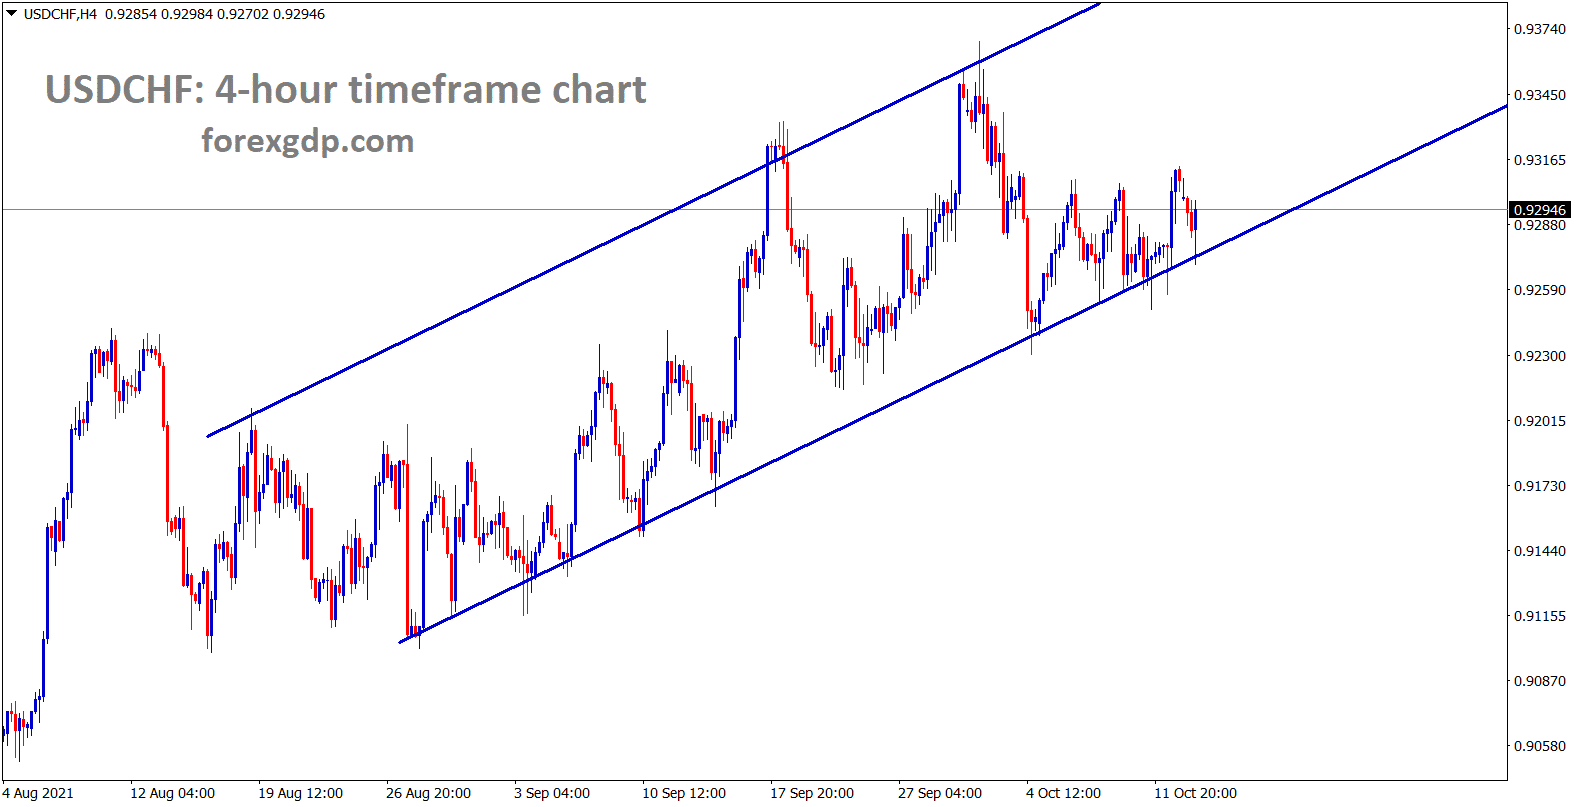 USDCHF is moving in an uptrend line respecting the higher lows